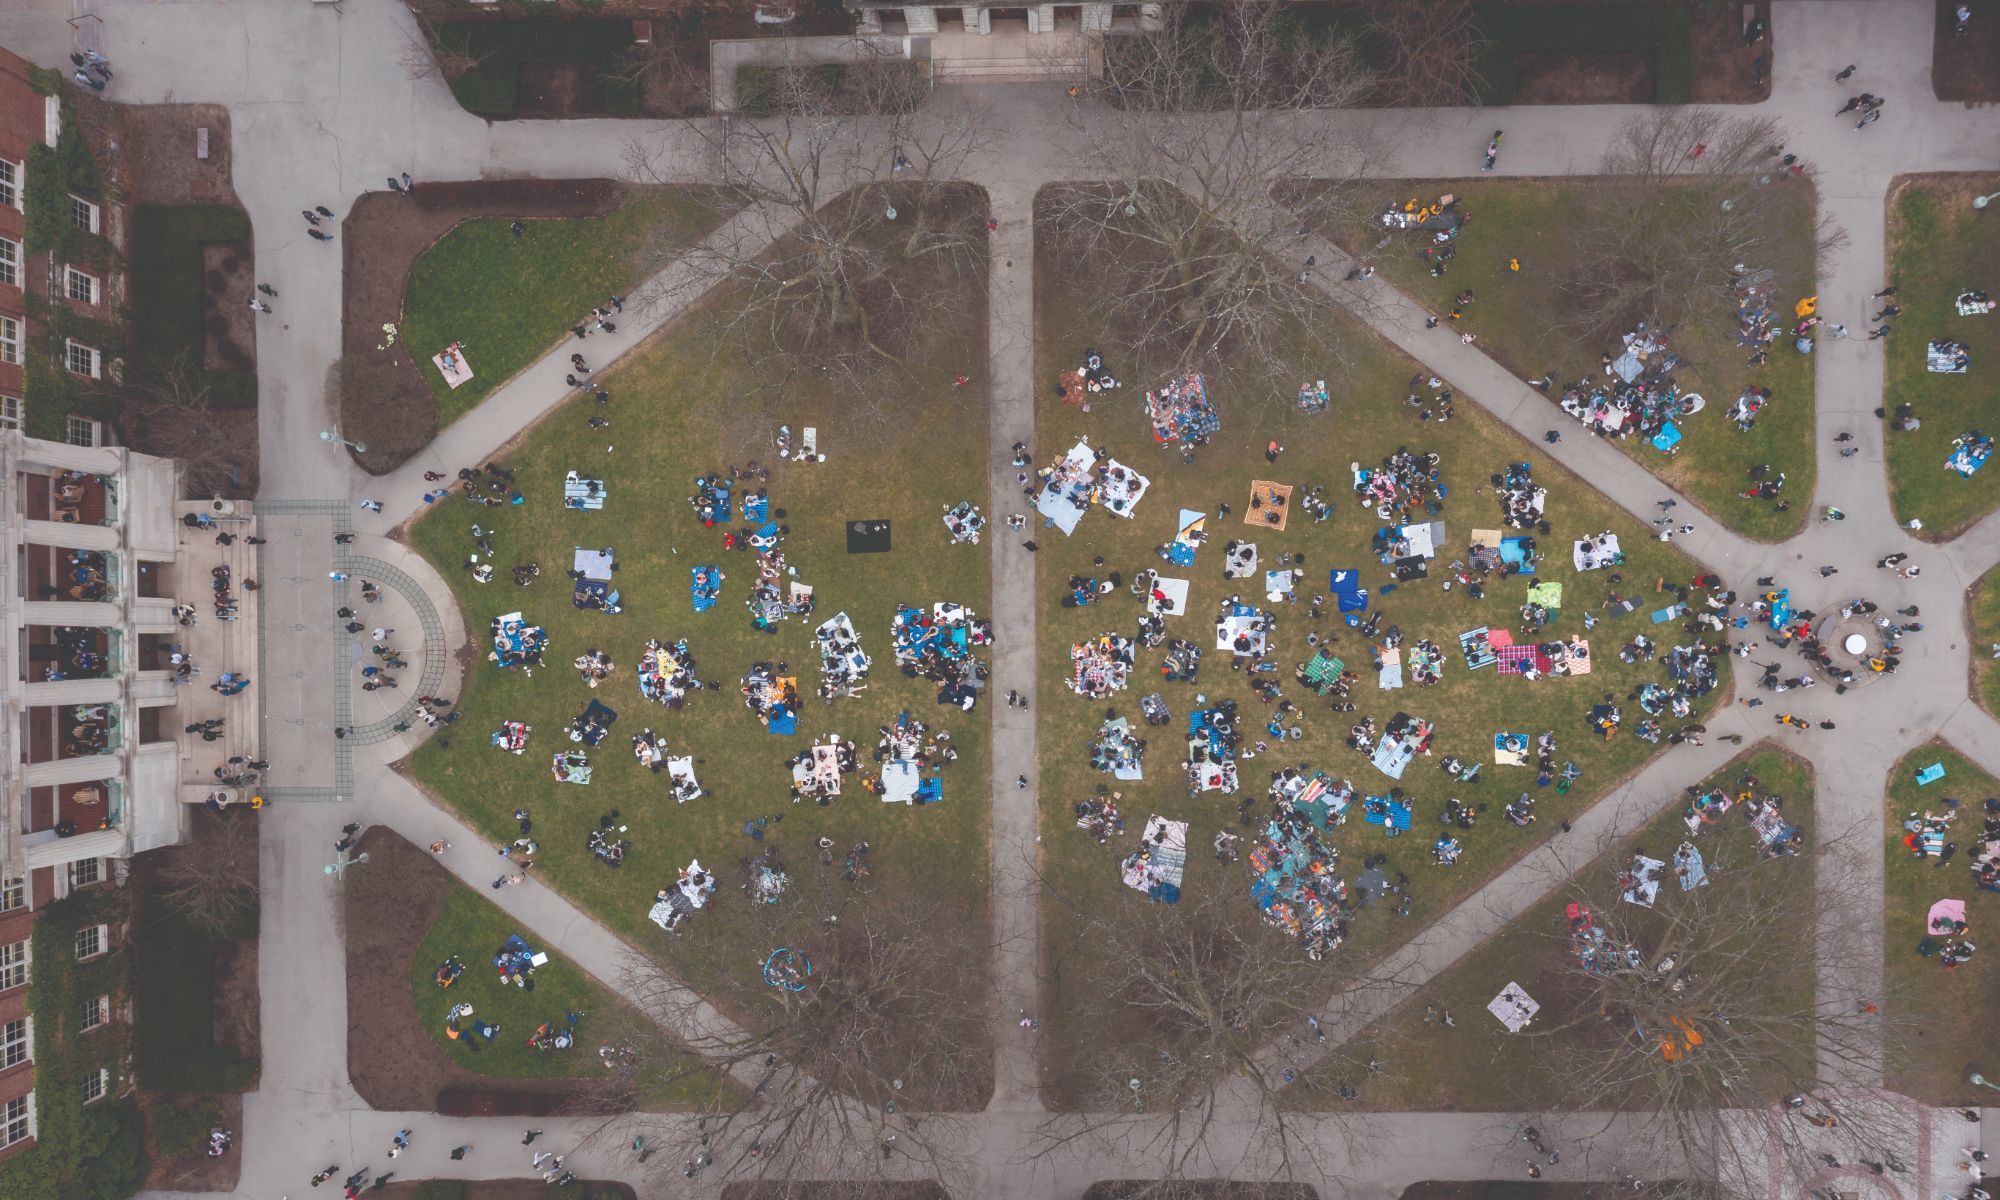 Aerial view of a large park with people gathered on blankets in groups across two main grassy areas divided by pedestrian pathways. The park is surrounded by trees and buildings, with intersecting paths creating symmetrical patterns.